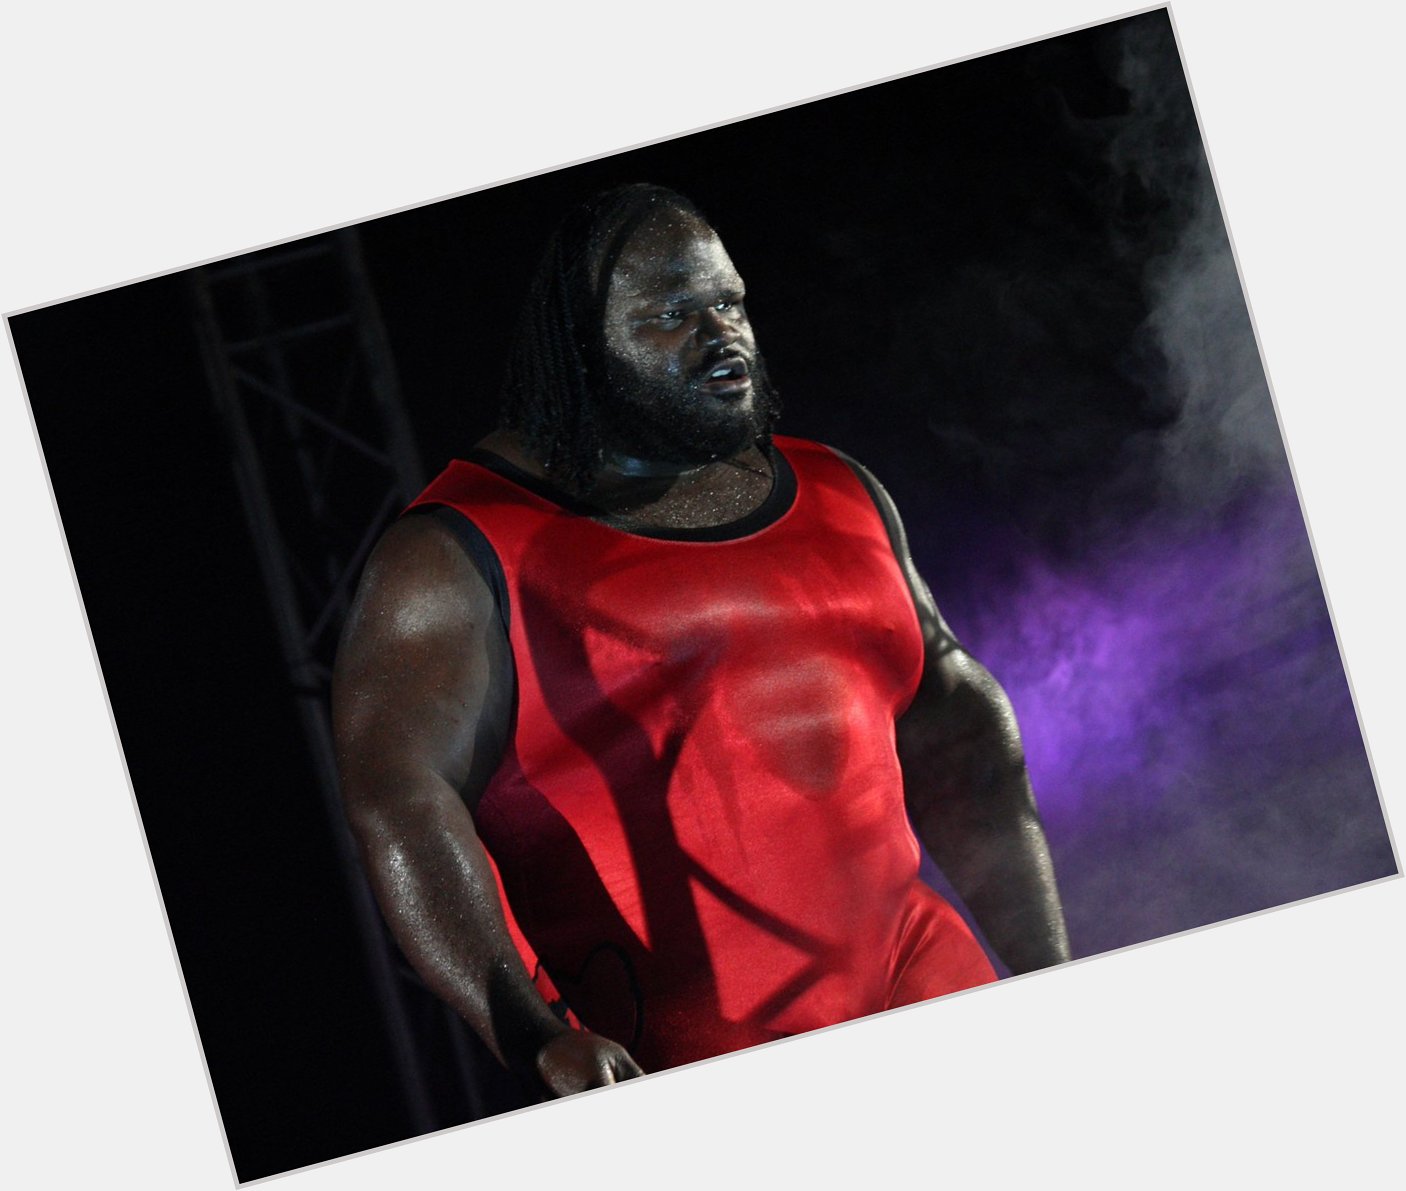 Happy birthday to Olympic weightlifter and WWE Hall of Famer, Mark Henry!

Have yourself a day, Sexual Chocolate! 